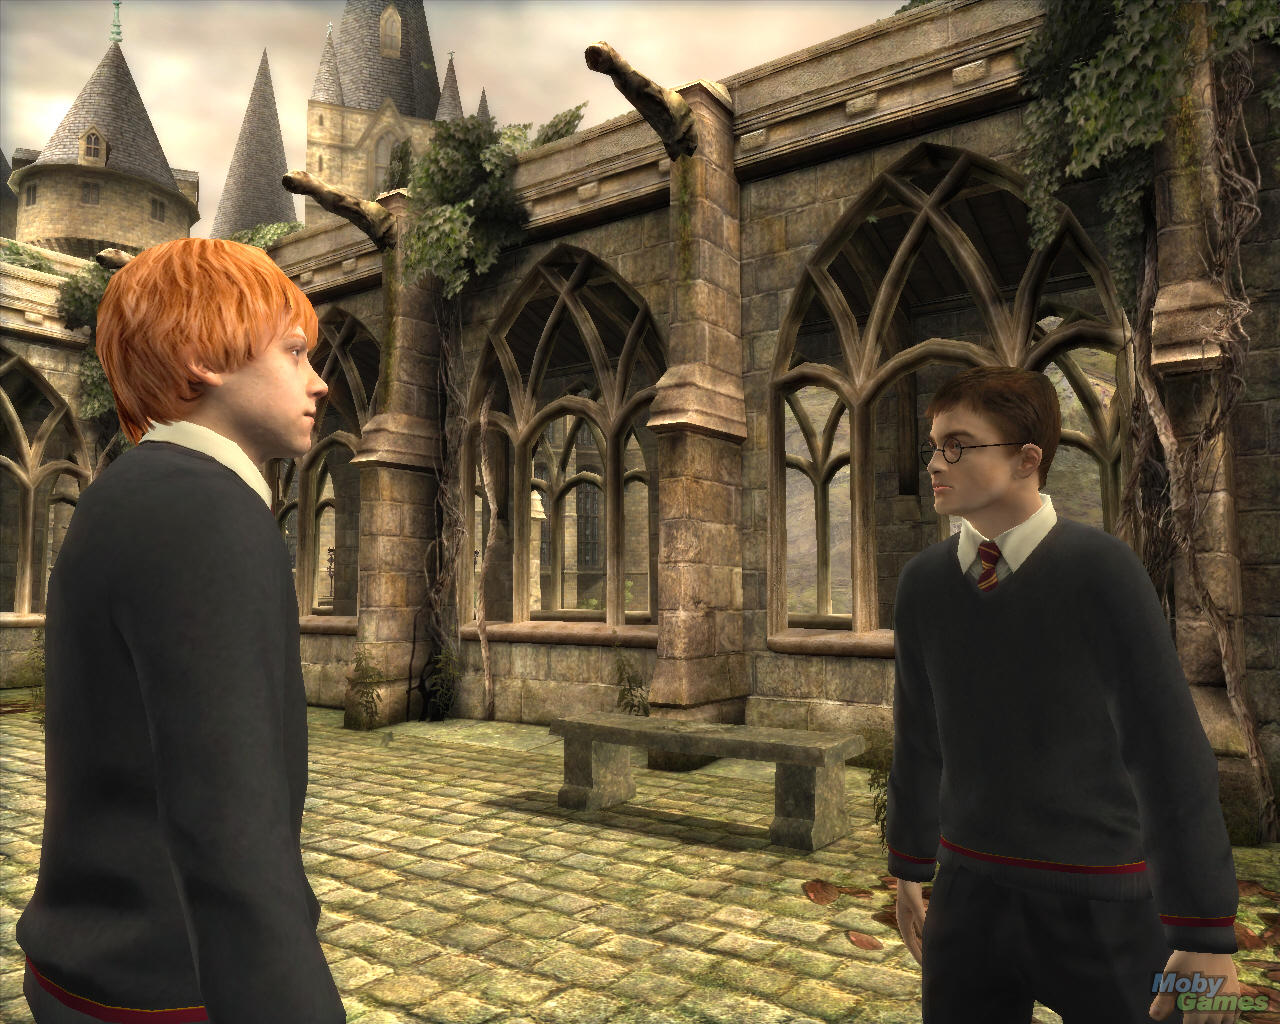 harry potter order of the phoenix (wii)